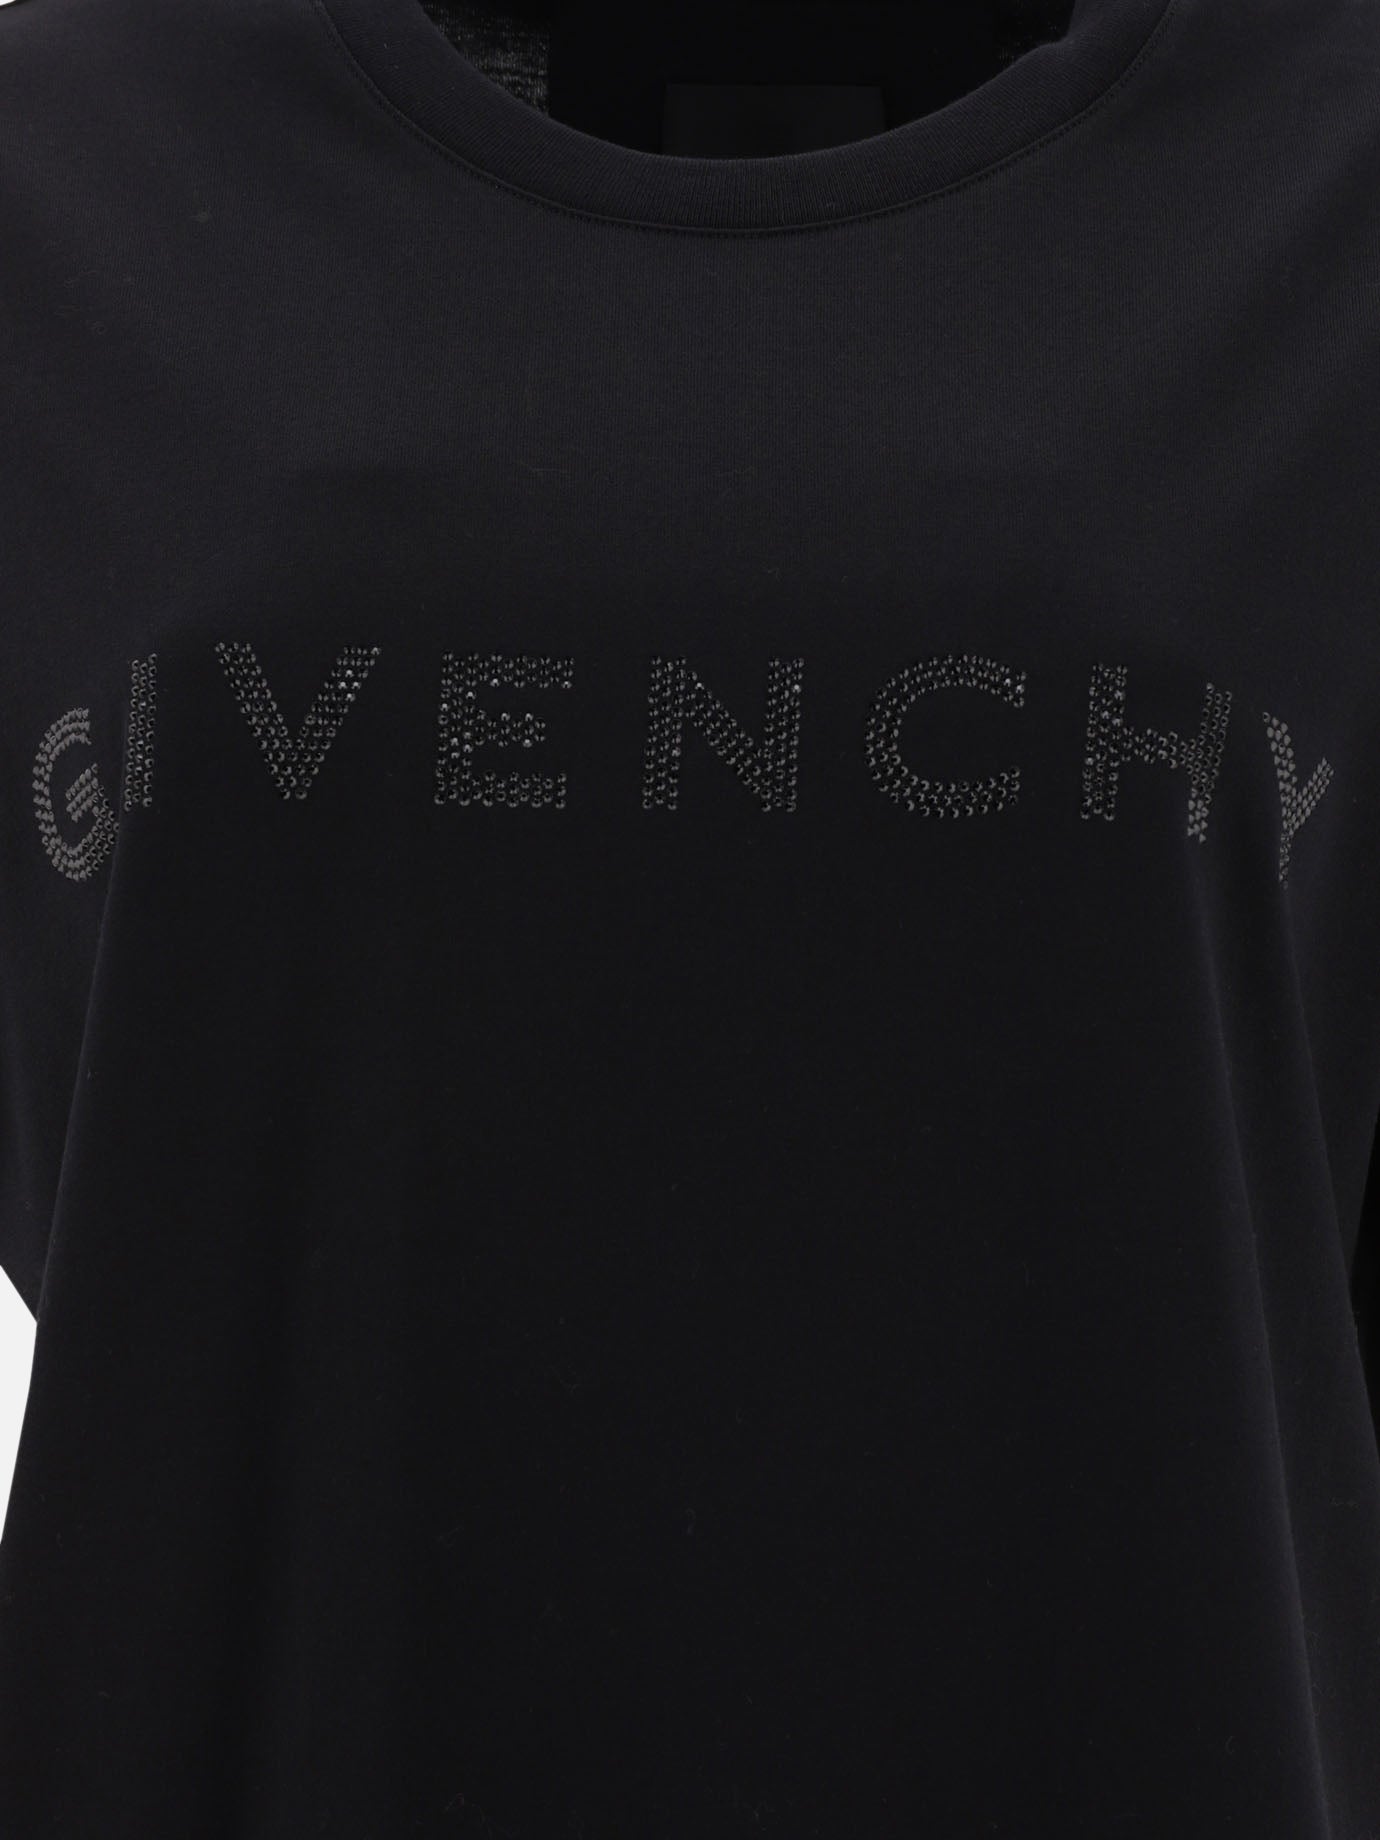 GIVENCHY t-shirt in cotton with rhinestones